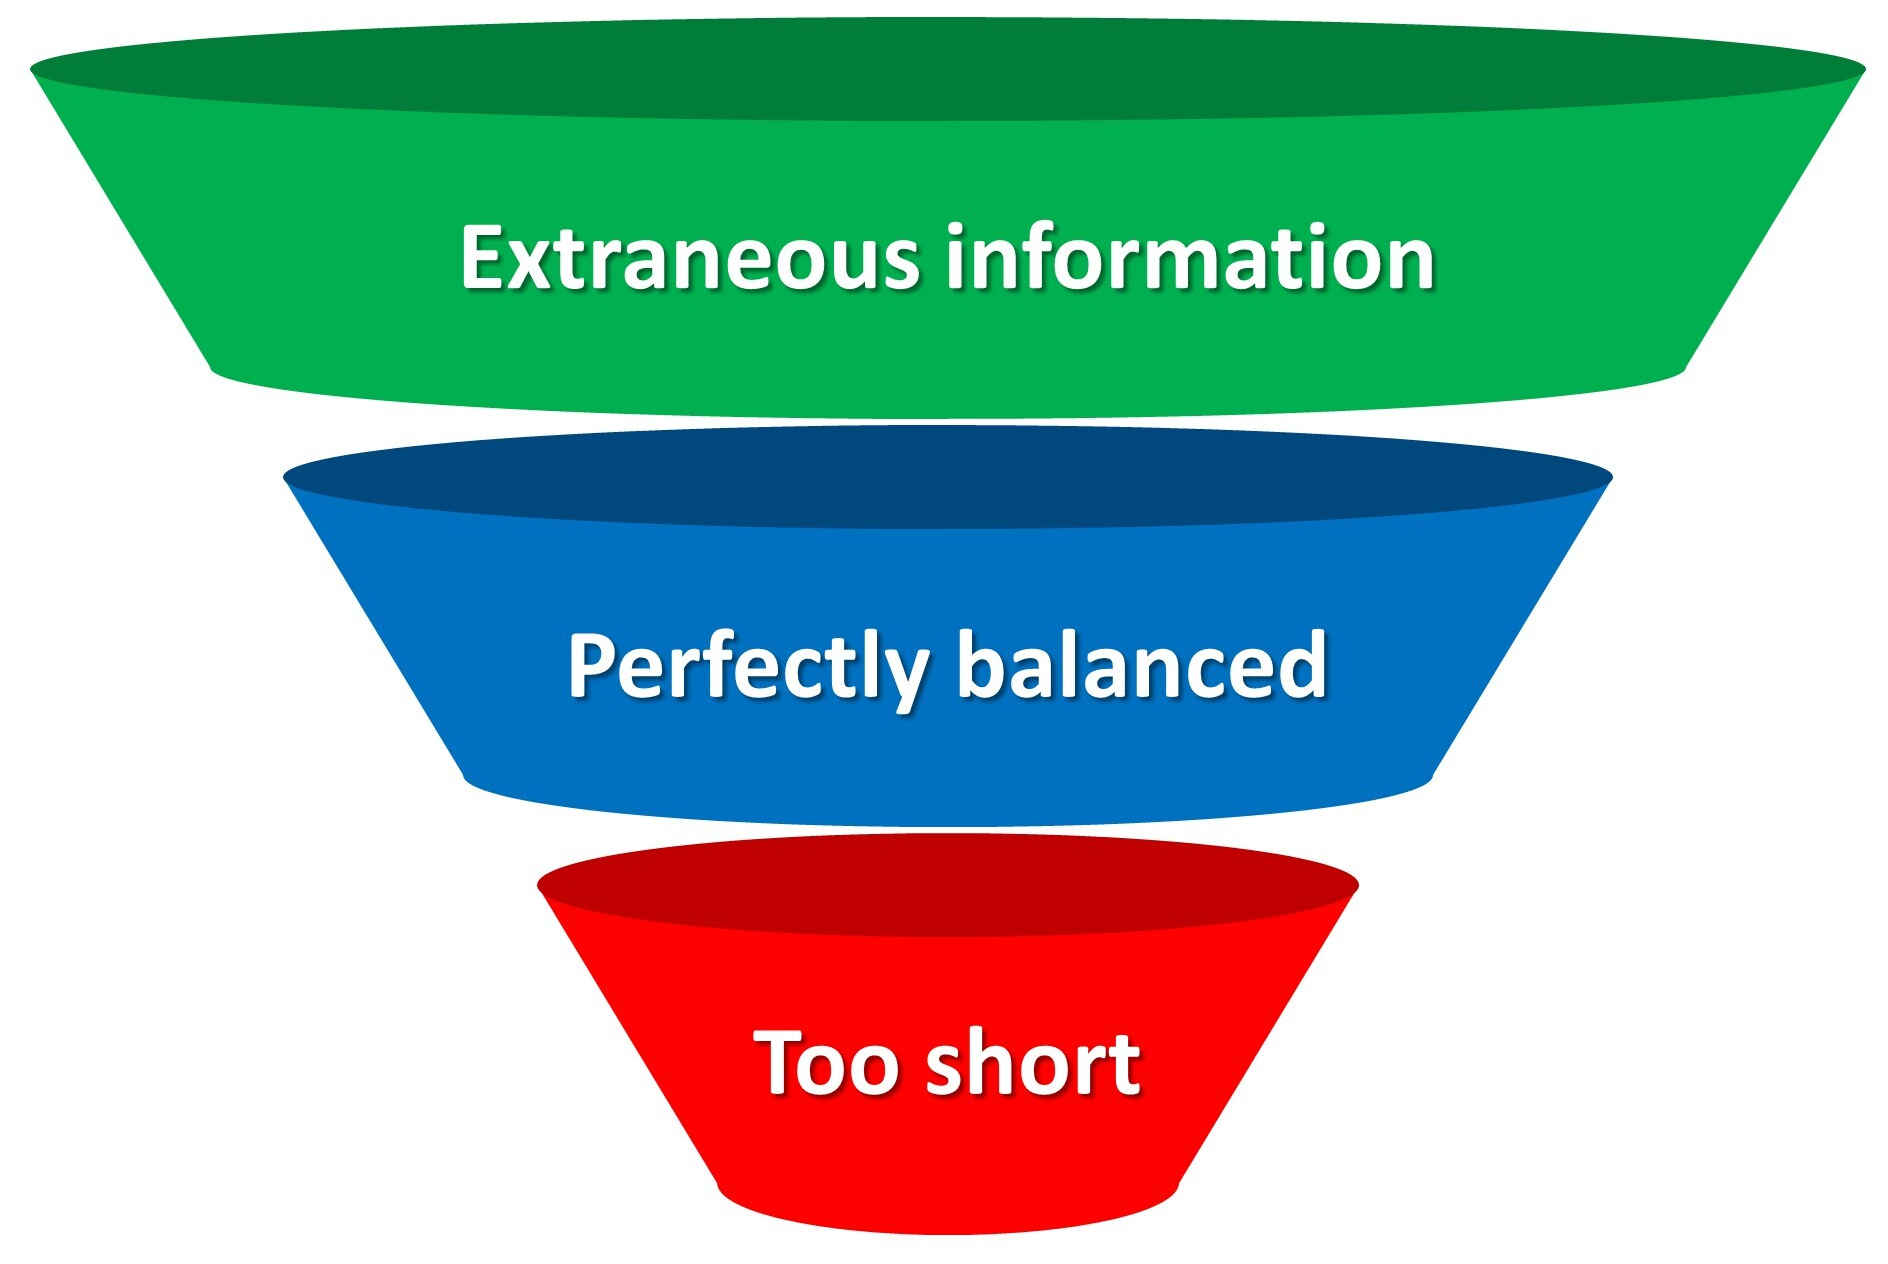 Funnel with three sections: Extraneous Information at the top, Perfectly Balanced in the center, and Too Short at the bottom, to demonstrate the balance required for a dissertation.